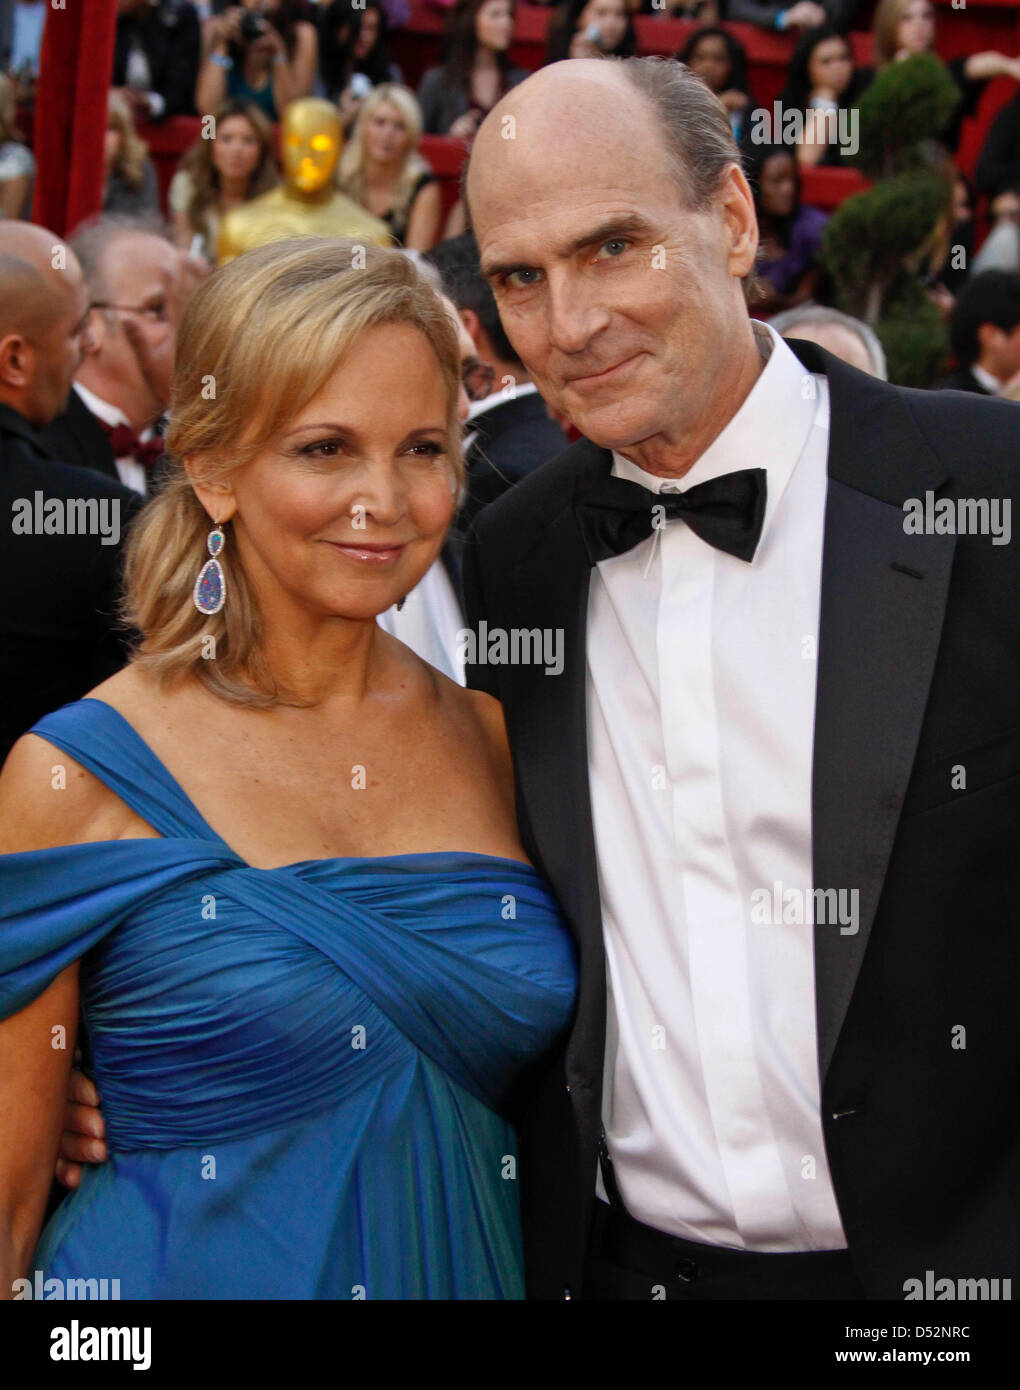 US musician James Taylor and his wife Caroline Taylor arrive on the red carpet during the 82nd Annual Academy Awards at the Kodak Theatre in Hollywood, USA, 07 March 2010. The Oscars are awarded for outstanding individual or collective efforts in up to 25 categories in filmmaking. Photo: HUBERT BOESL Stock Photo